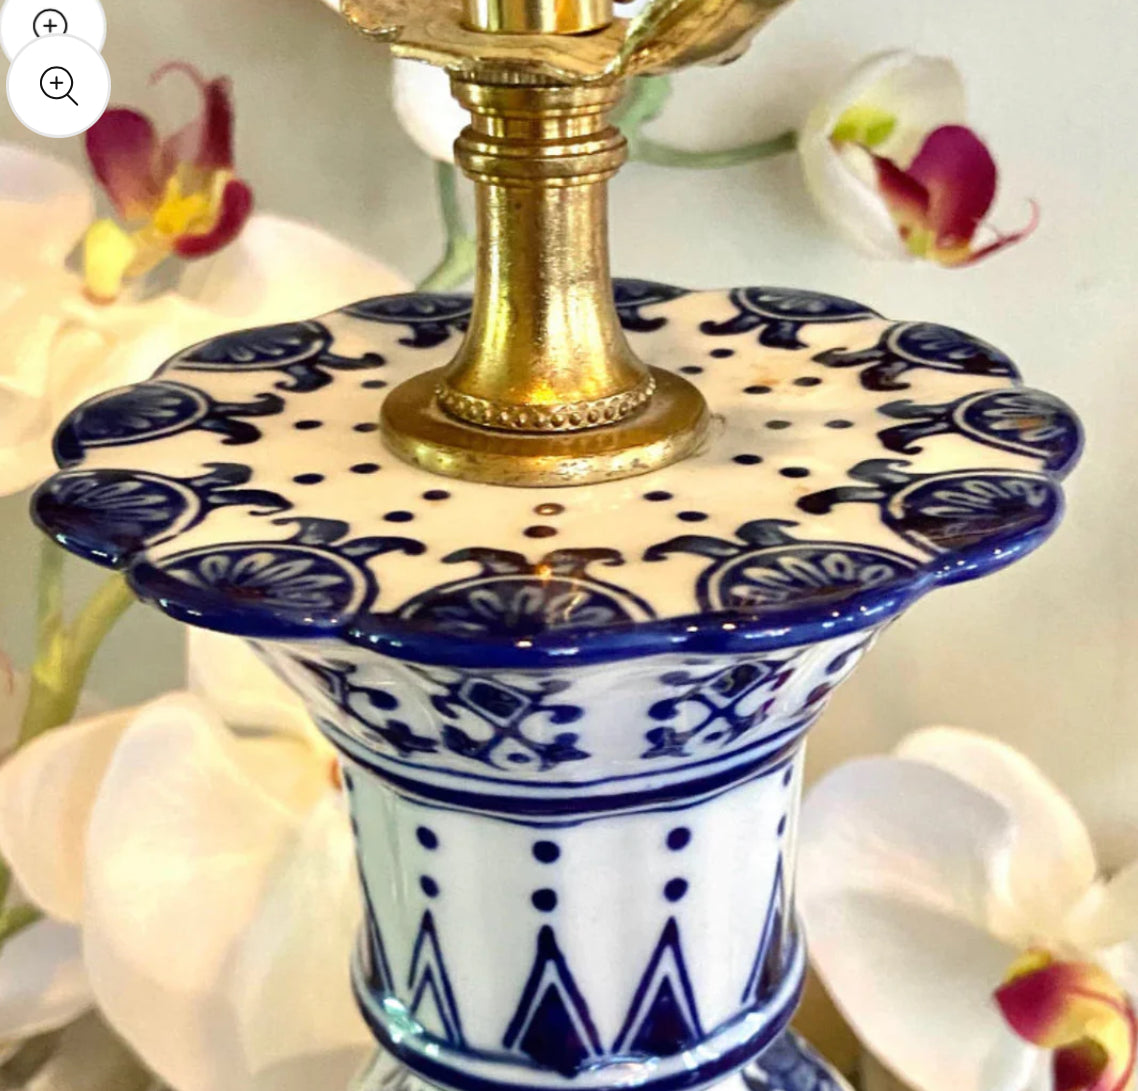 Vintage porcelain blue & white chinoiserie chic statuesque candlestick lamp.